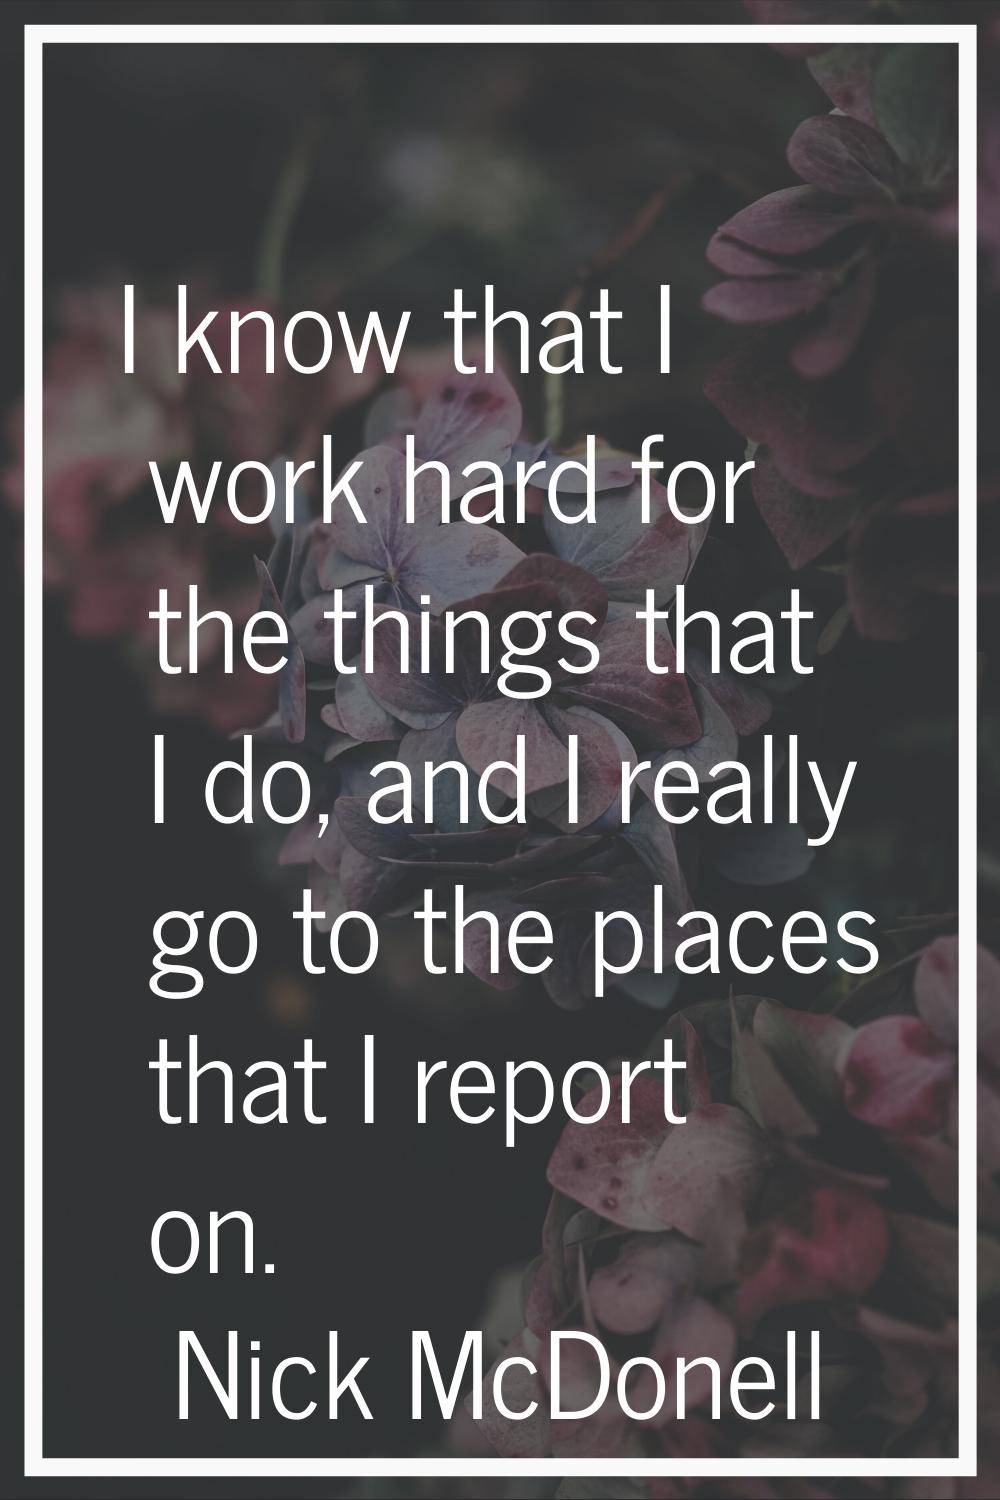 I know that I work hard for the things that I do, and I really go to the places that I report on.